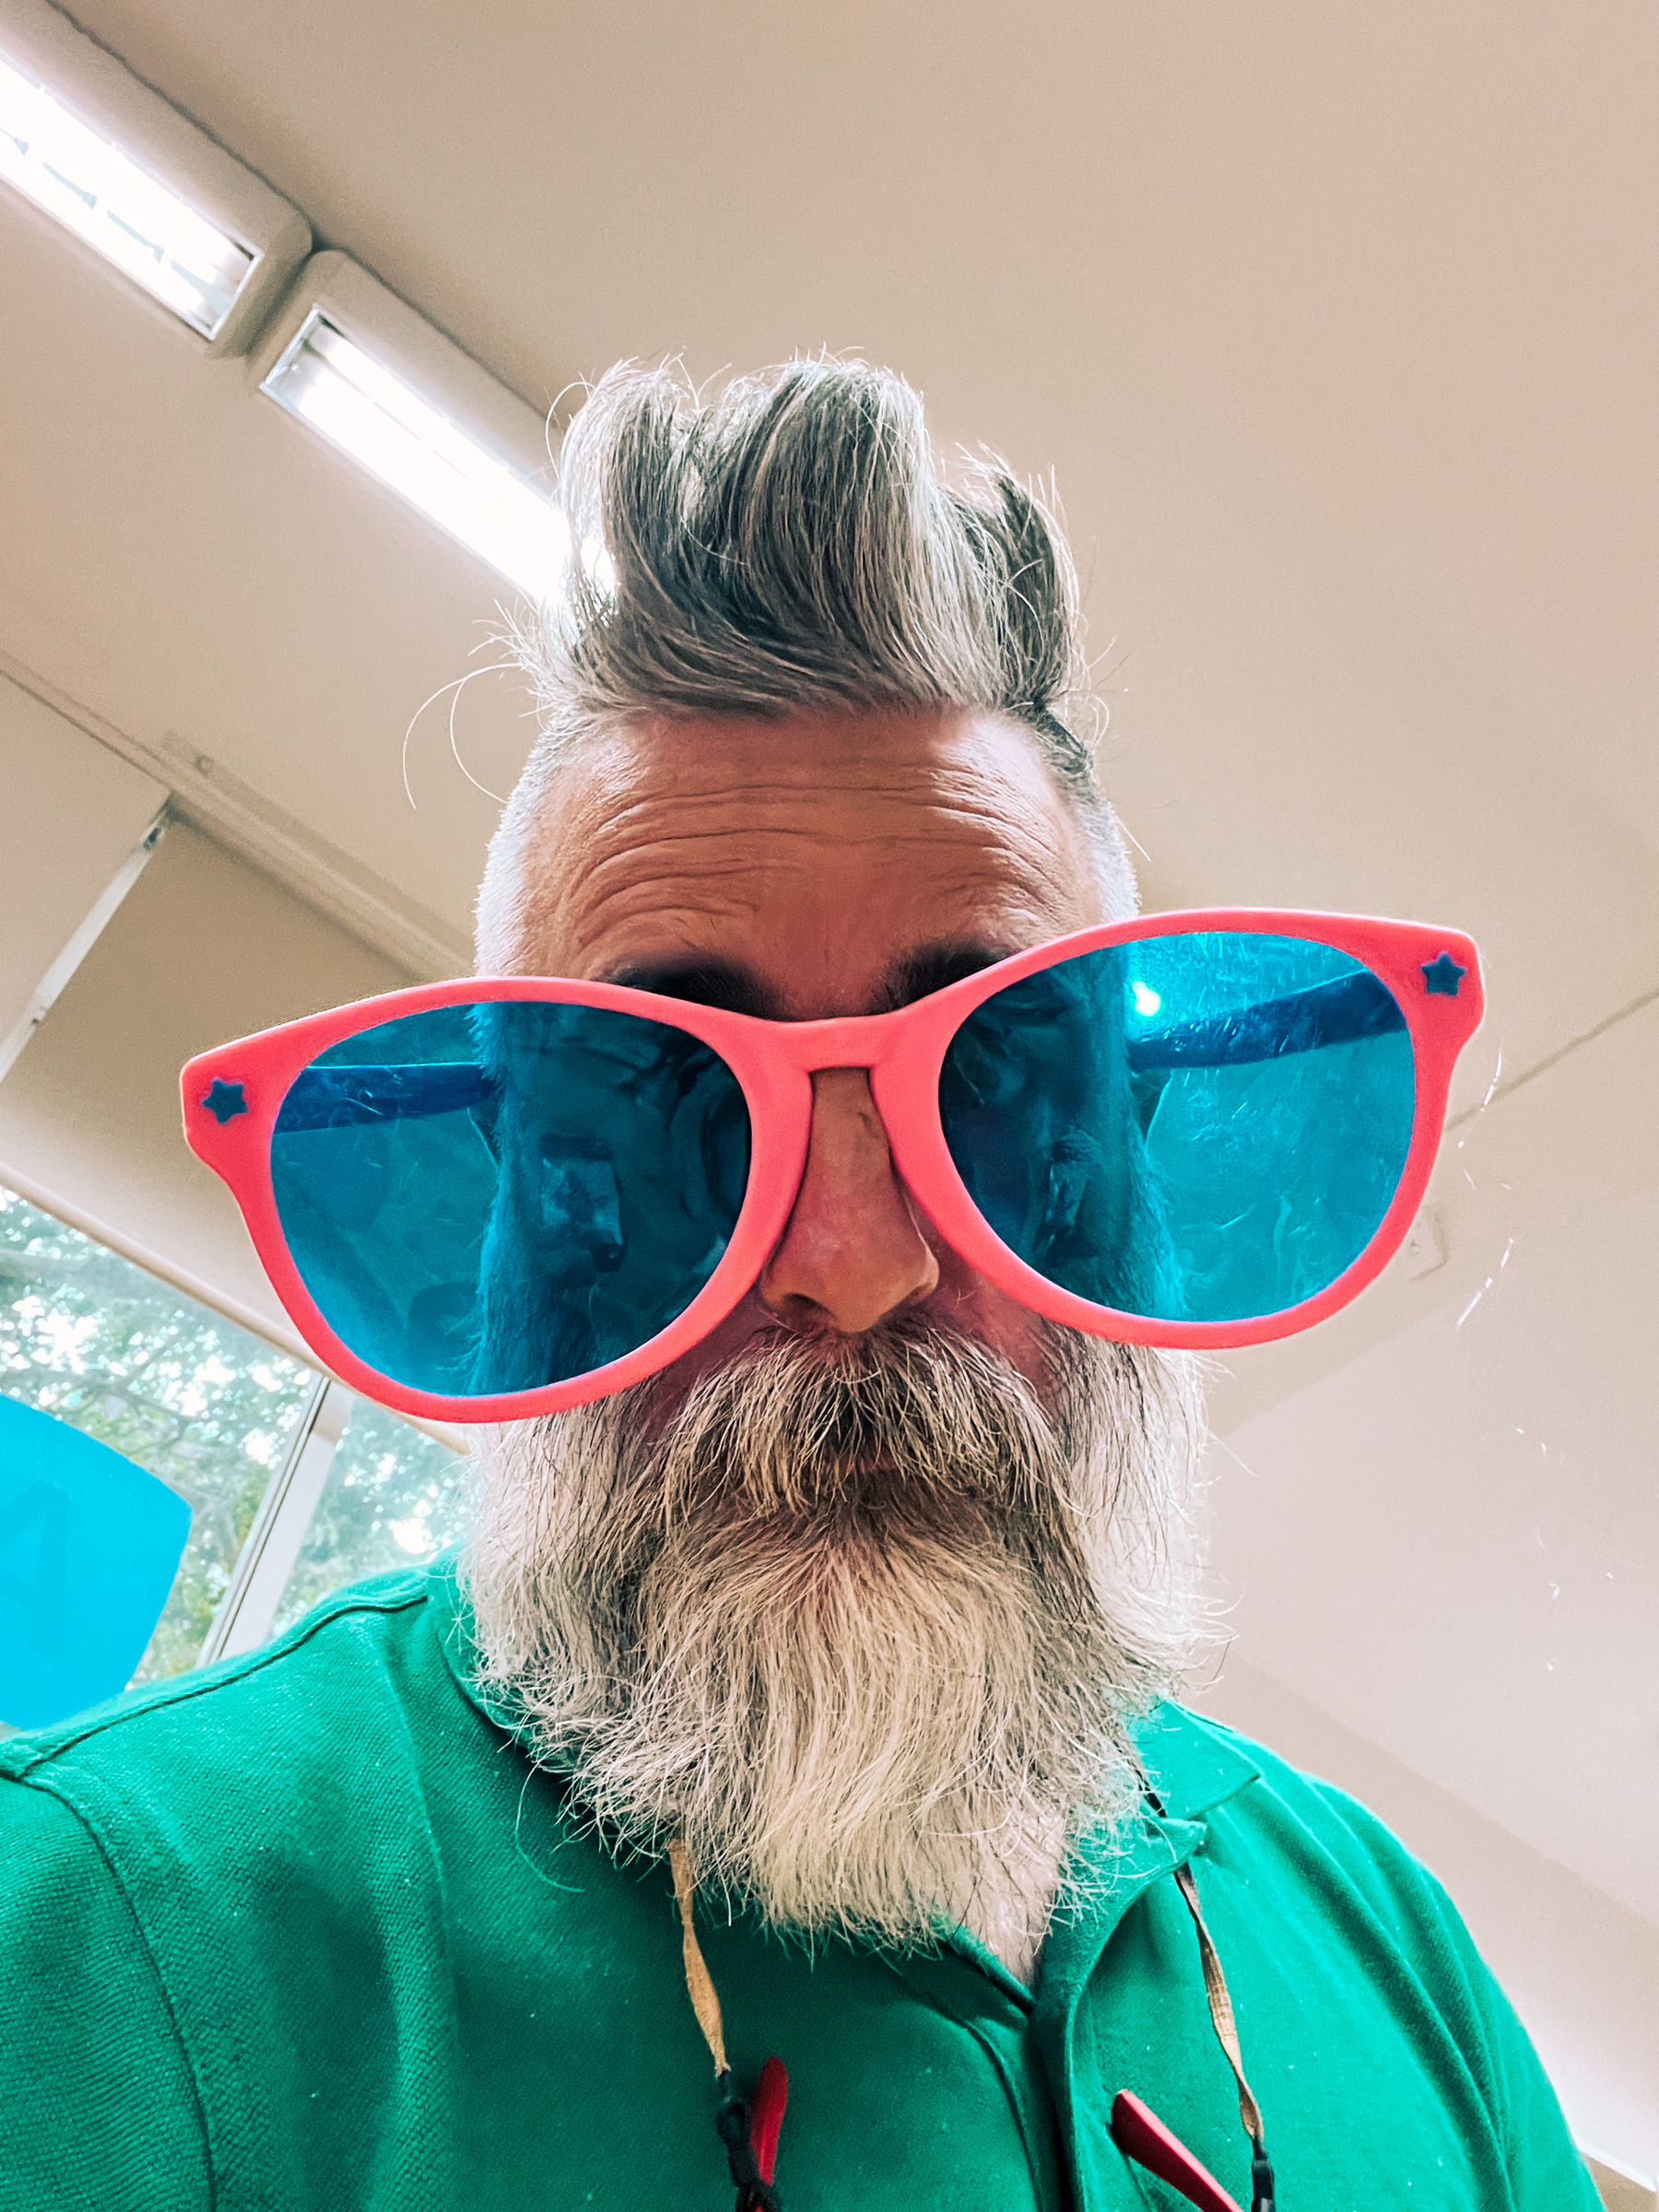 Selfie of a bearded man, with clownish oversized pink shades.